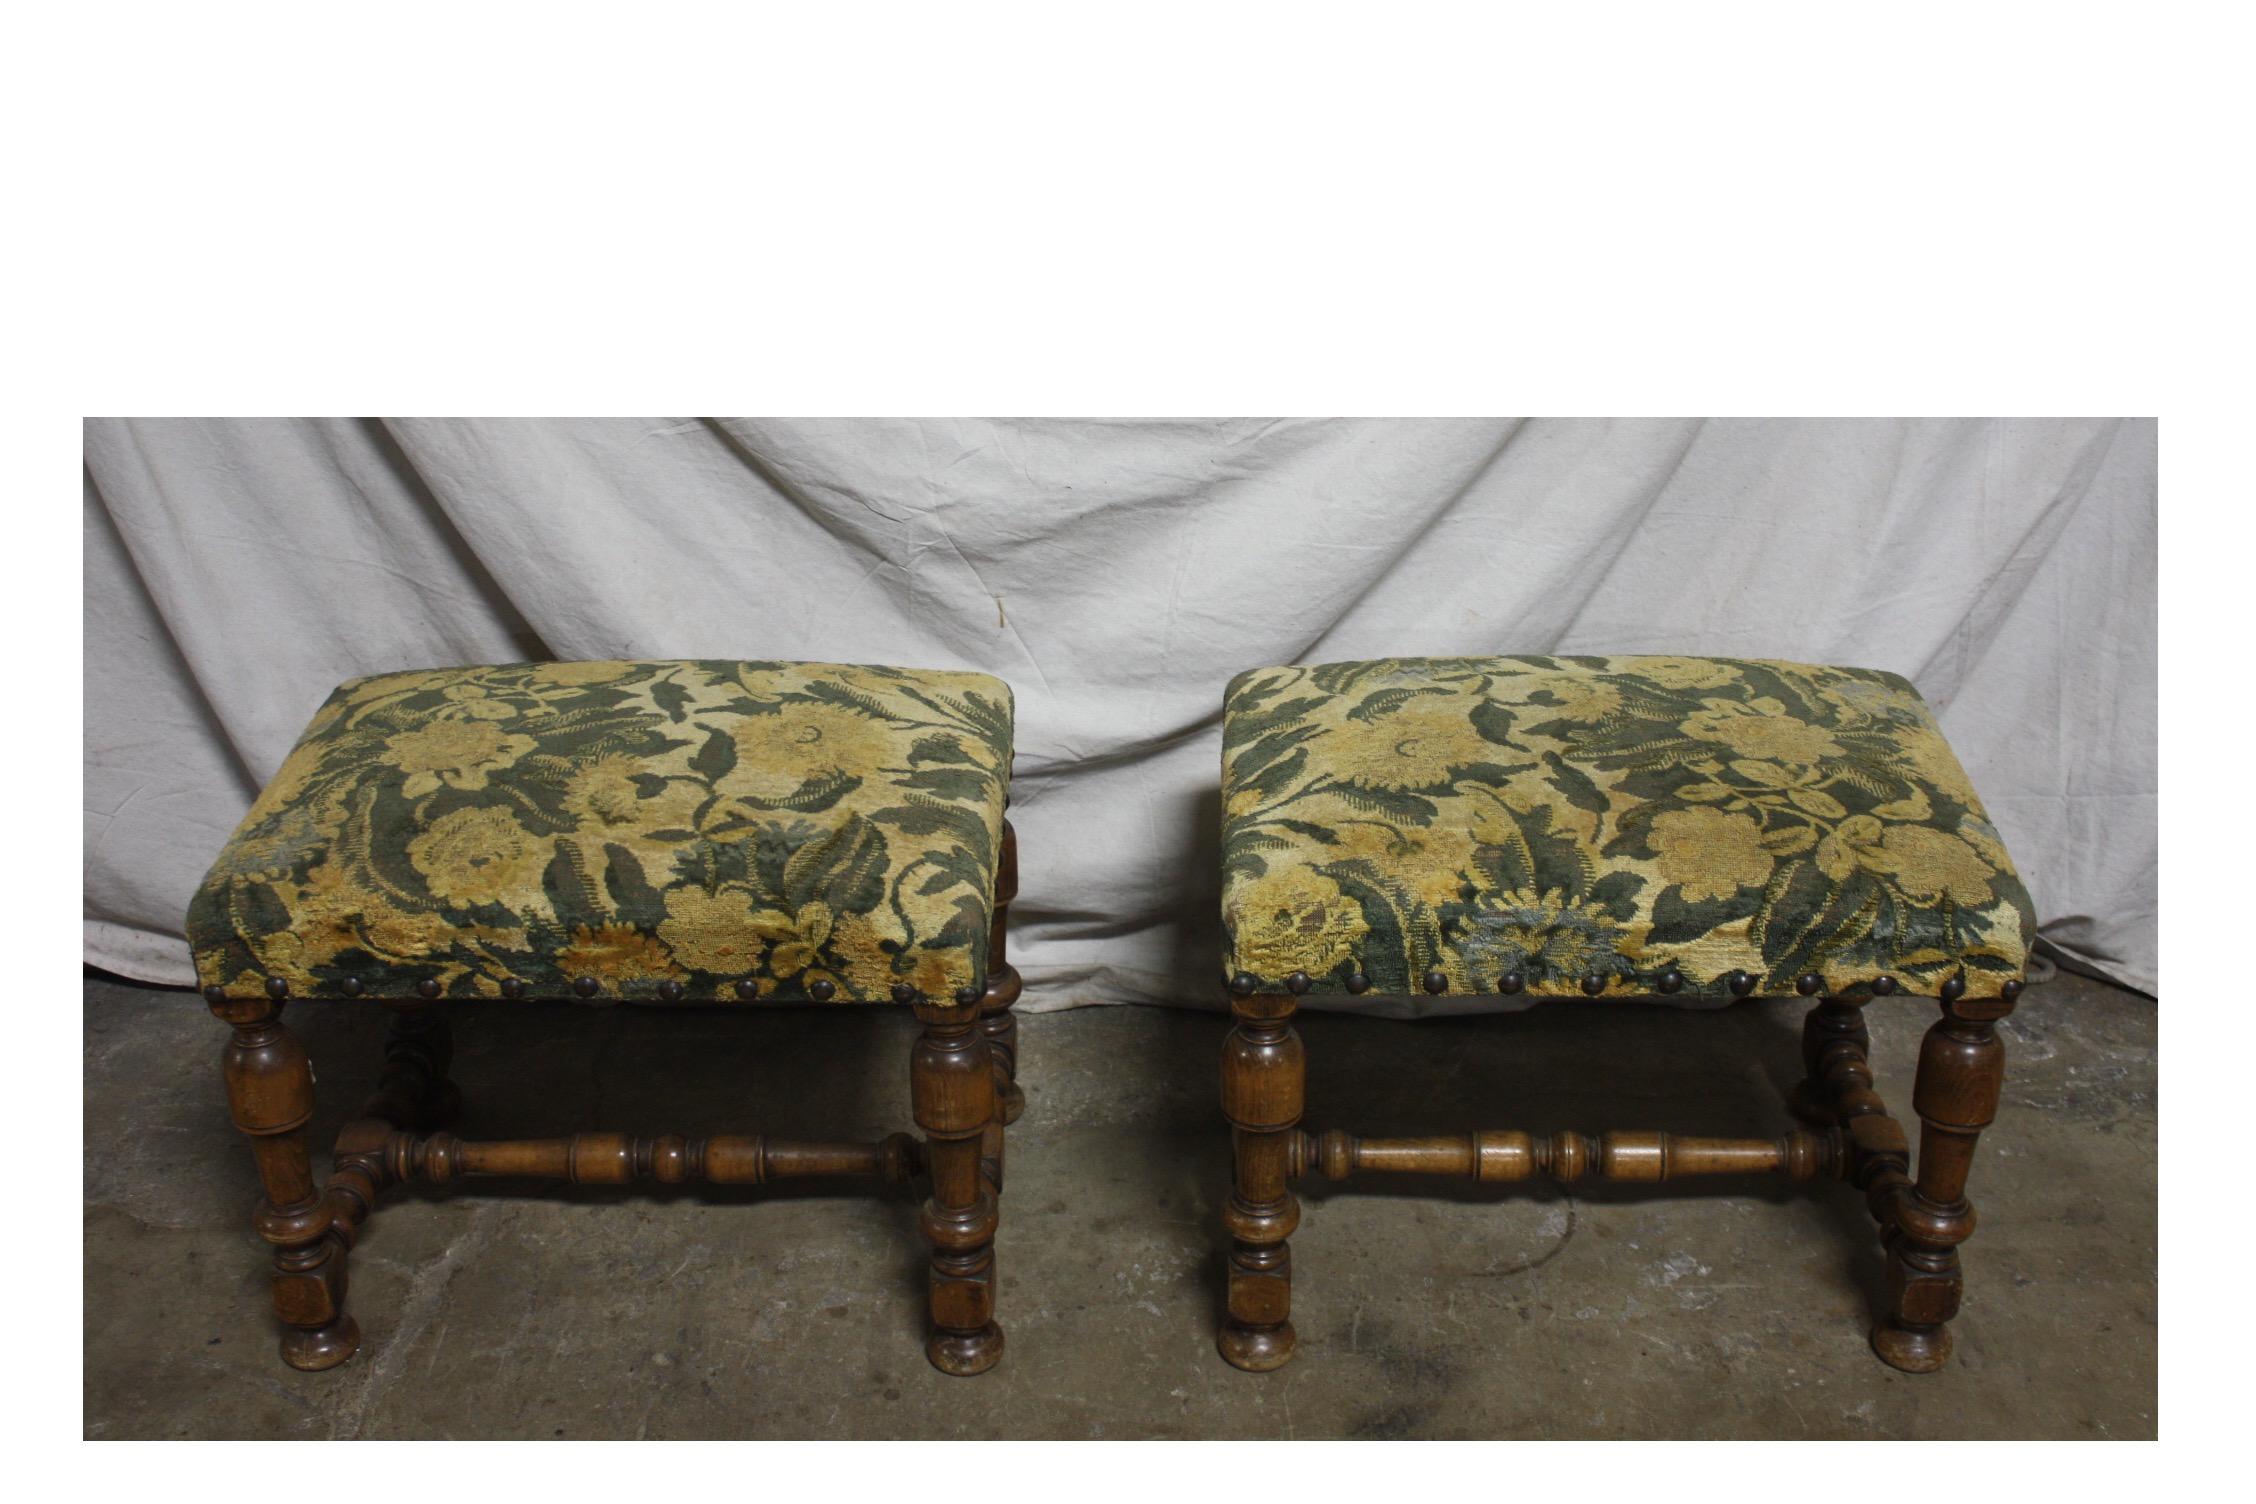 Pair of 19th century French stools.